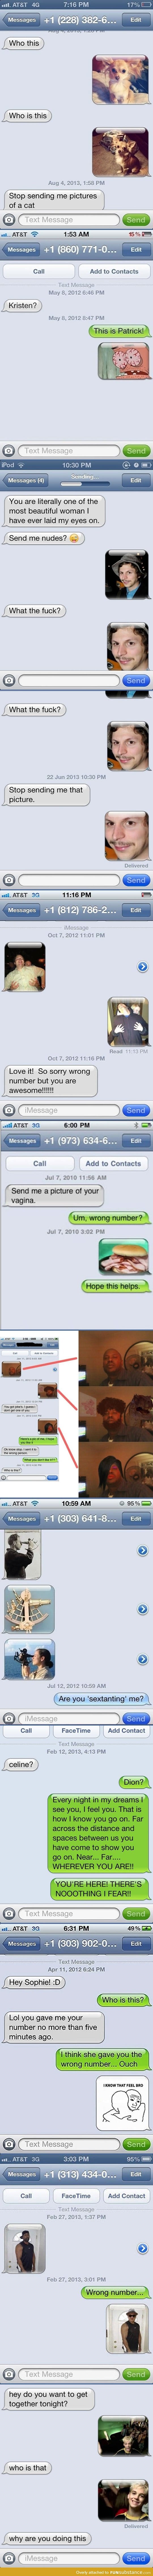 Perfect ways to respond to a wrong number text